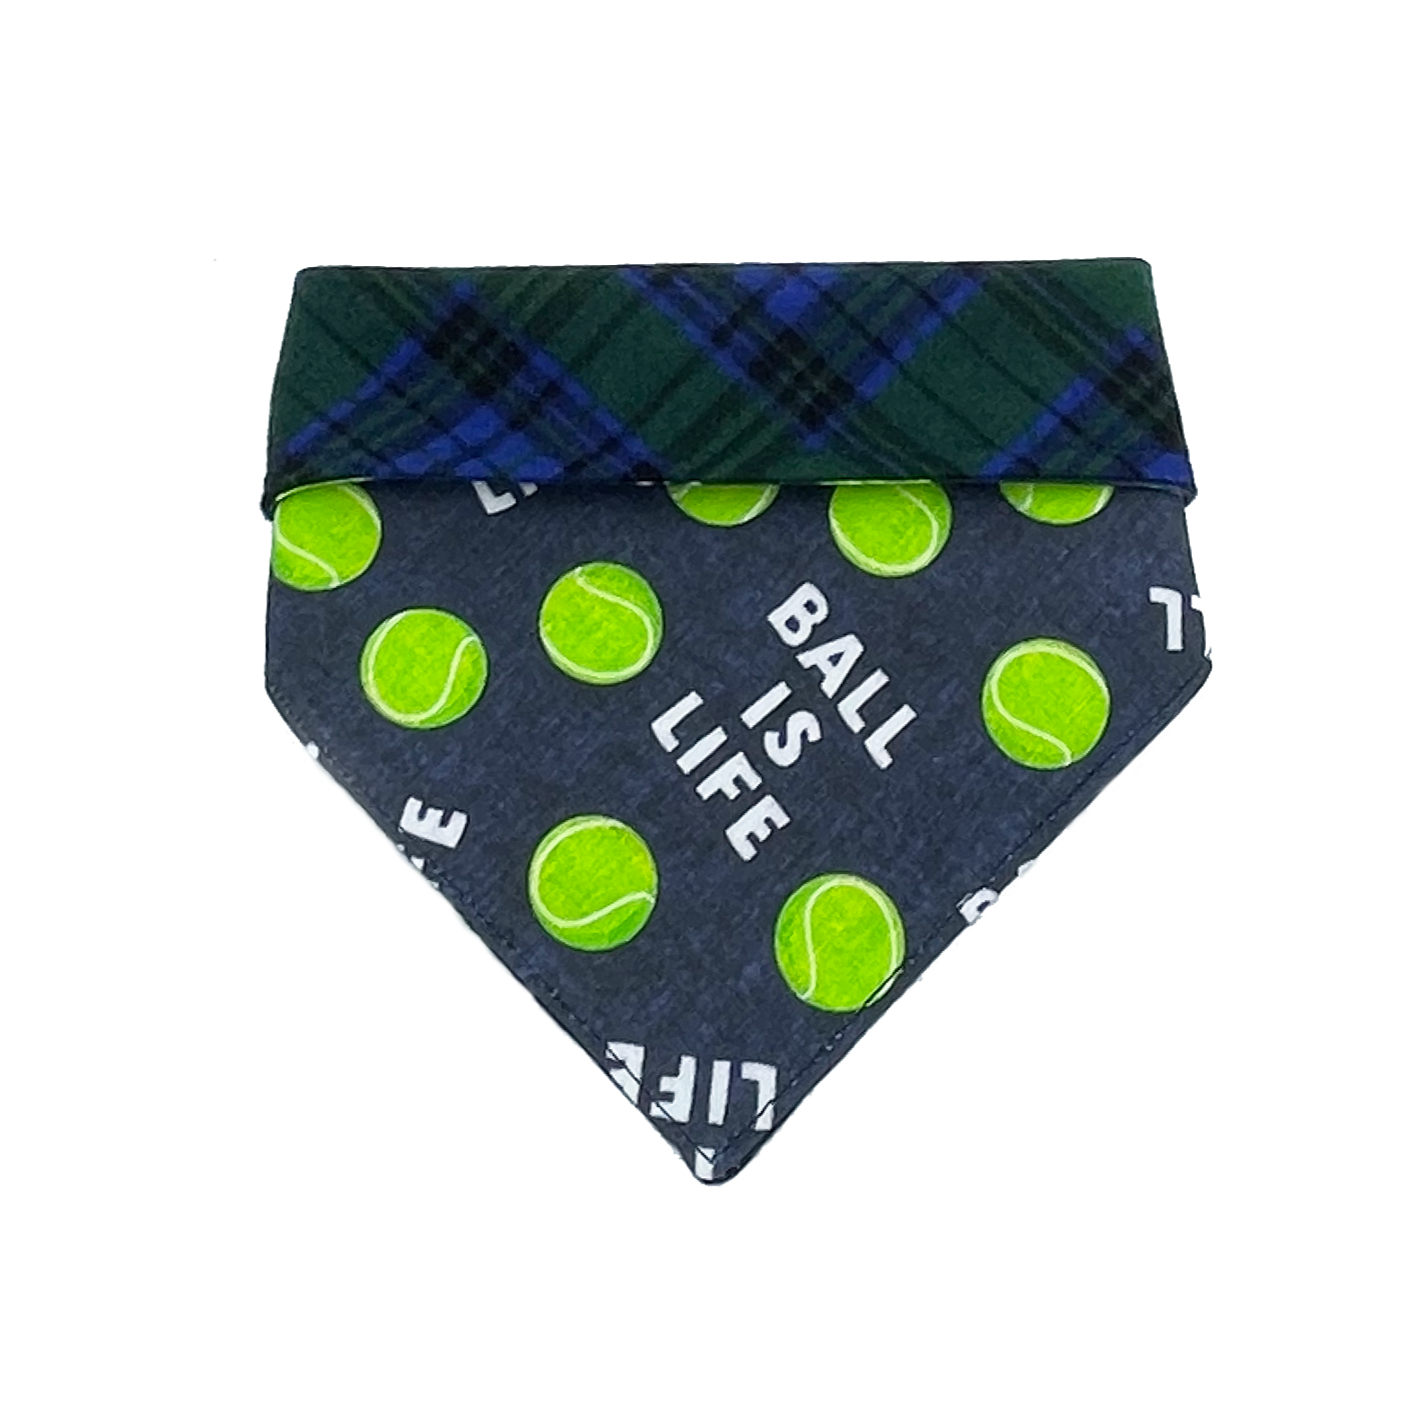 Ball Is Life with Plaid Flannel Pet Bandana